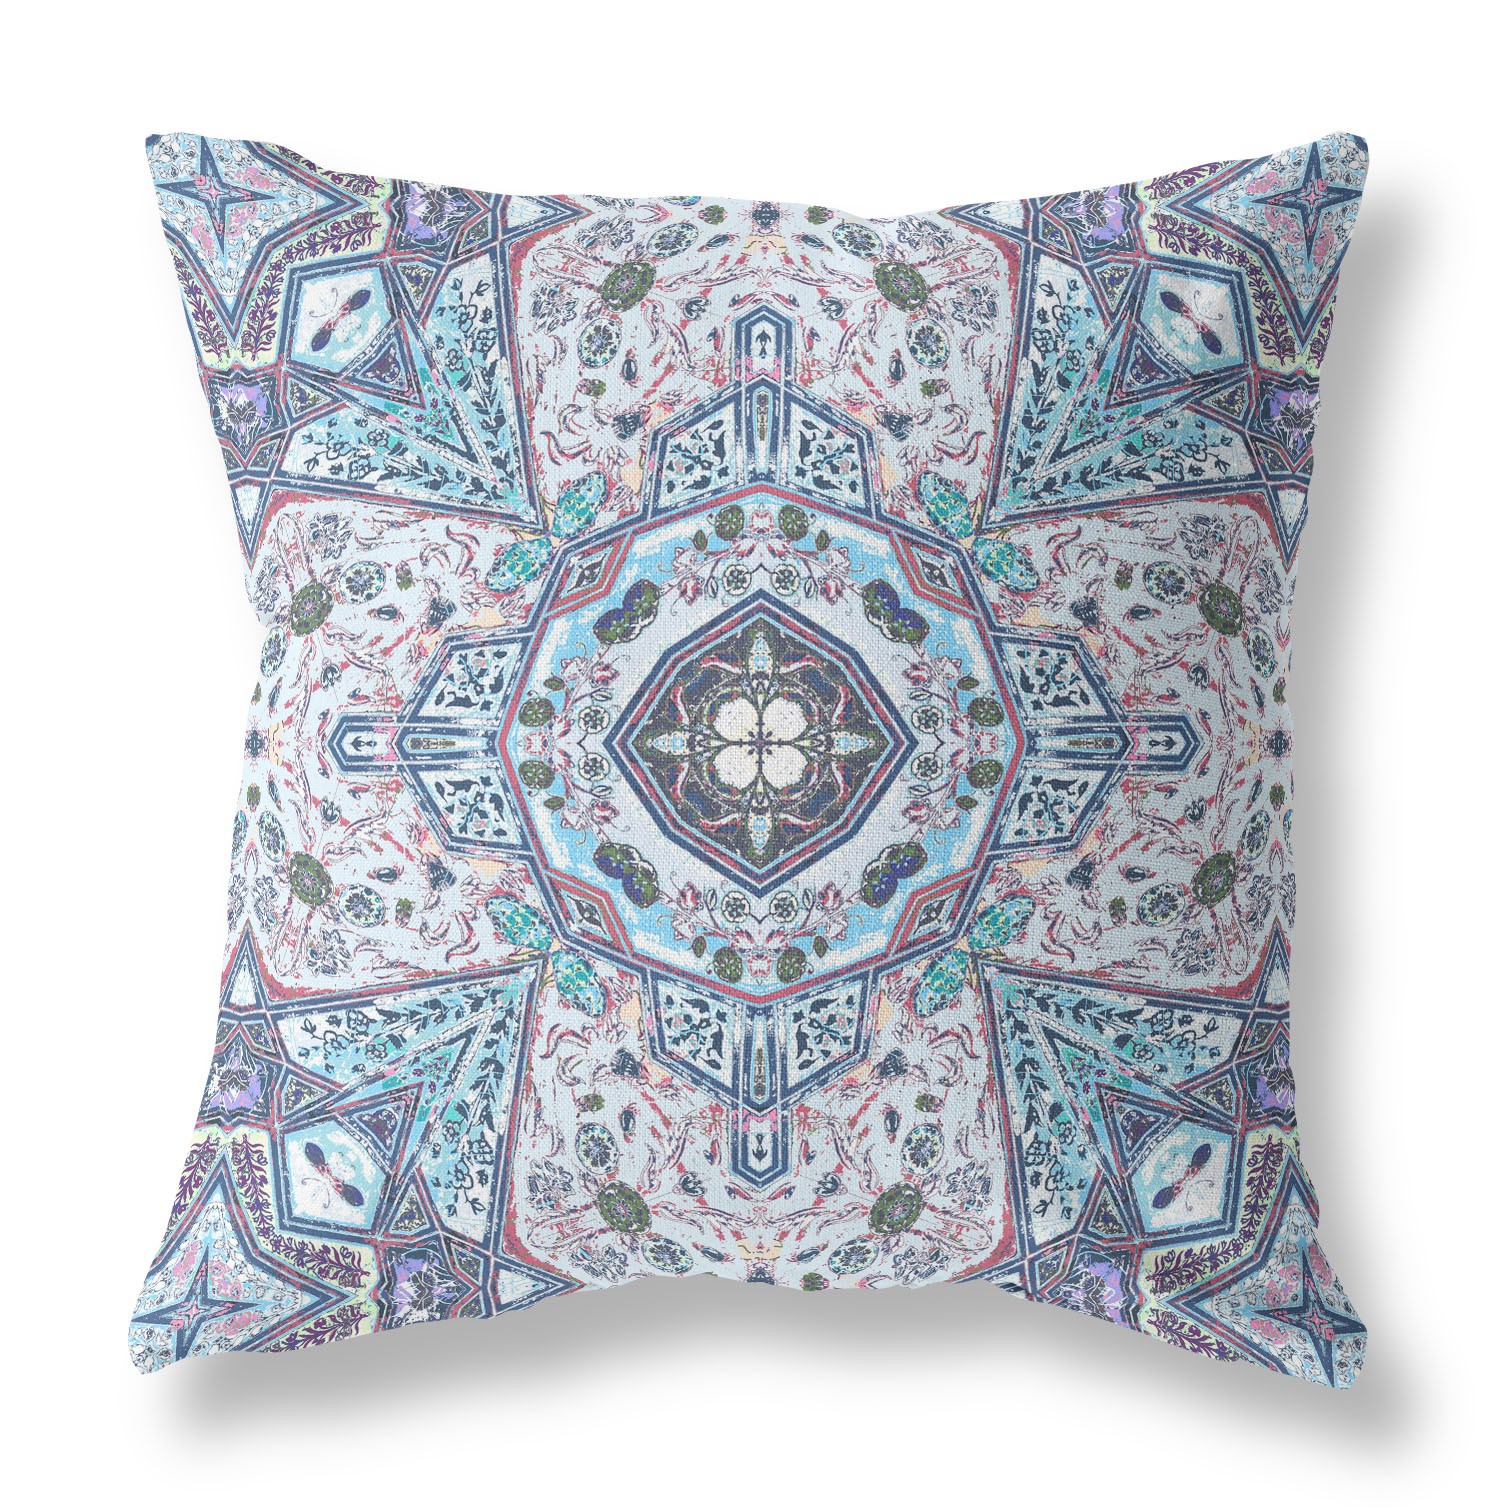 20" X 20" Blue And Gray Blown Seam Geometric Indoor Outdoor Throw Pillow Cover & Insert-418014-1